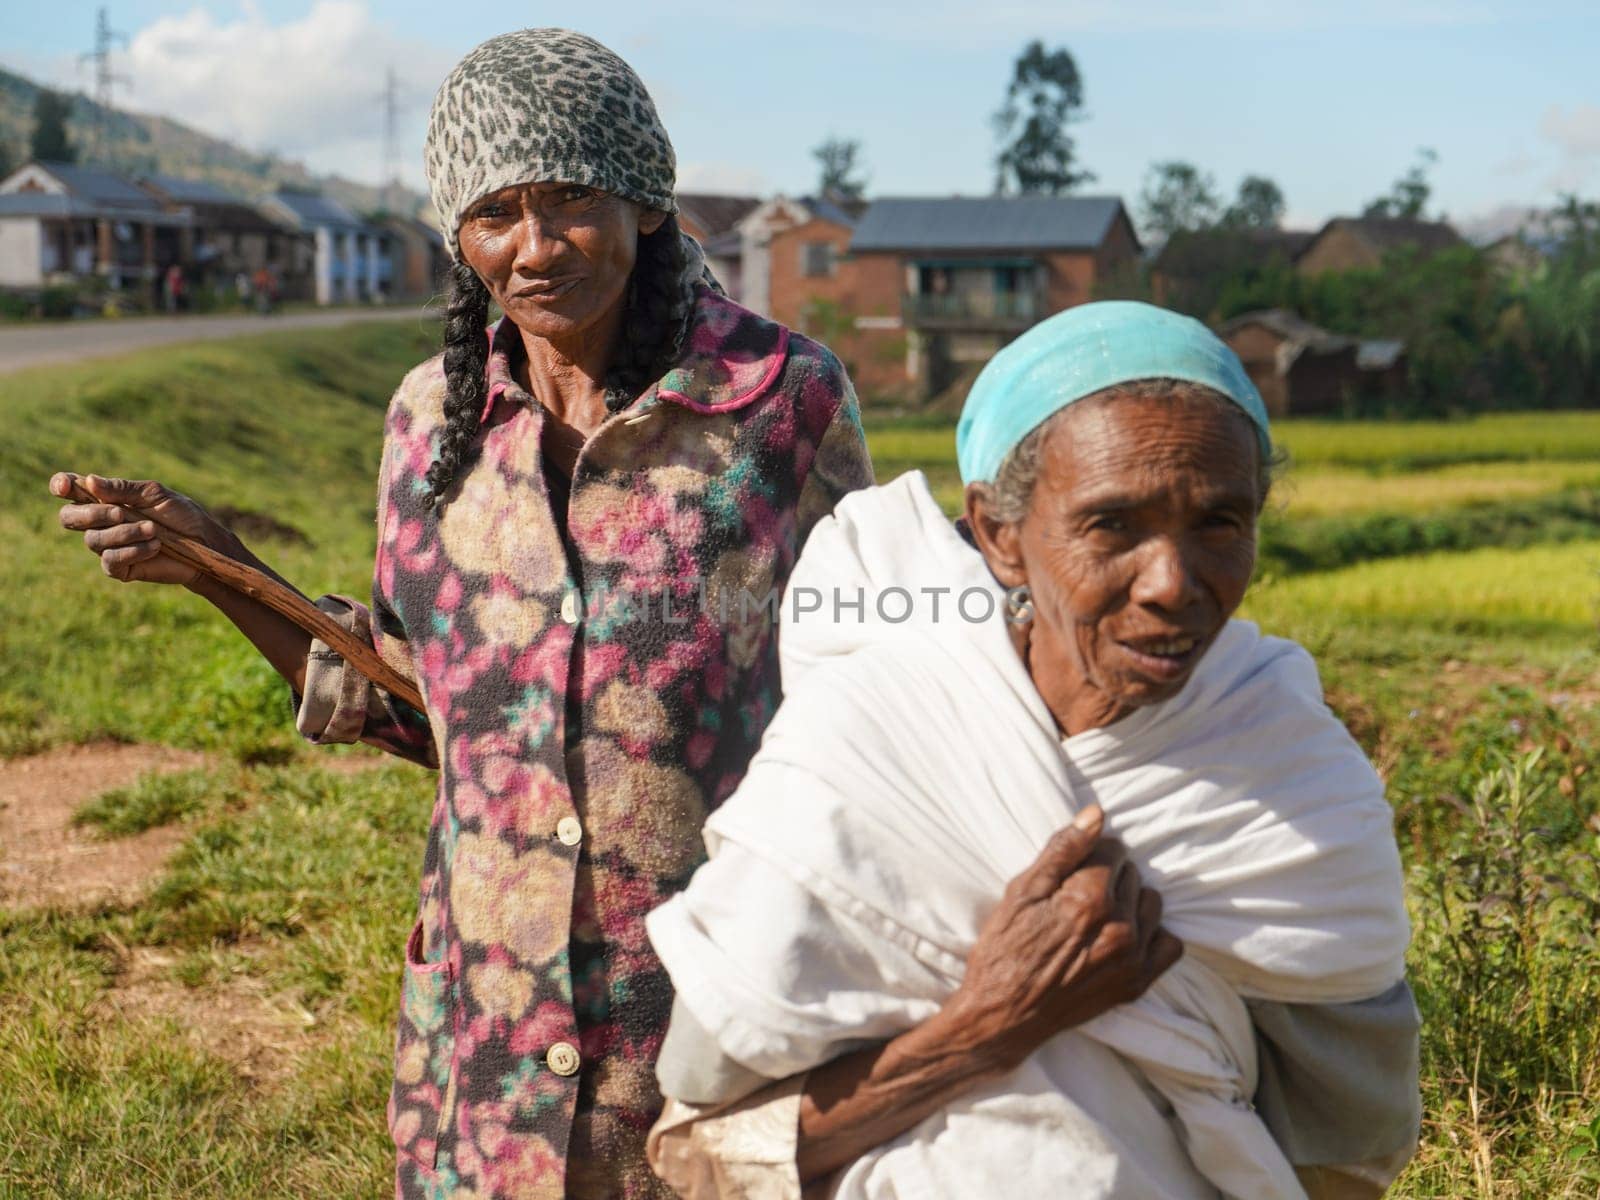 Manandoana, Madagascar - April 26, 2019: Unknown senior Malagasy women standing next to rice field where they worked on sunny day. People in this part of Africa are poor, but cheerful.